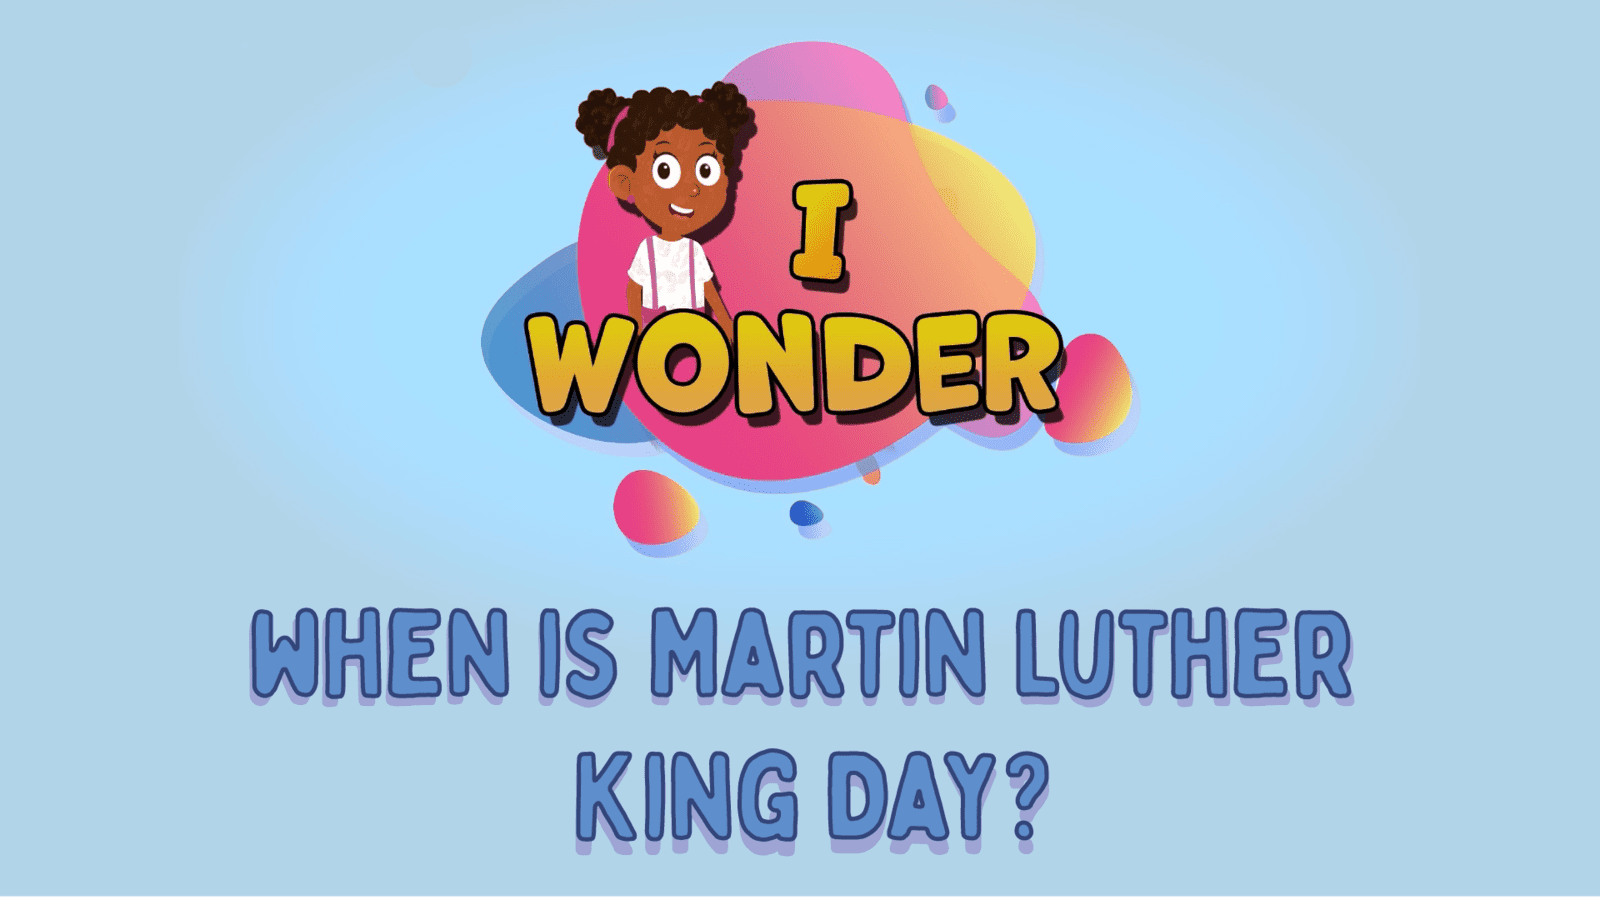 When Is Martin Luther King Day?